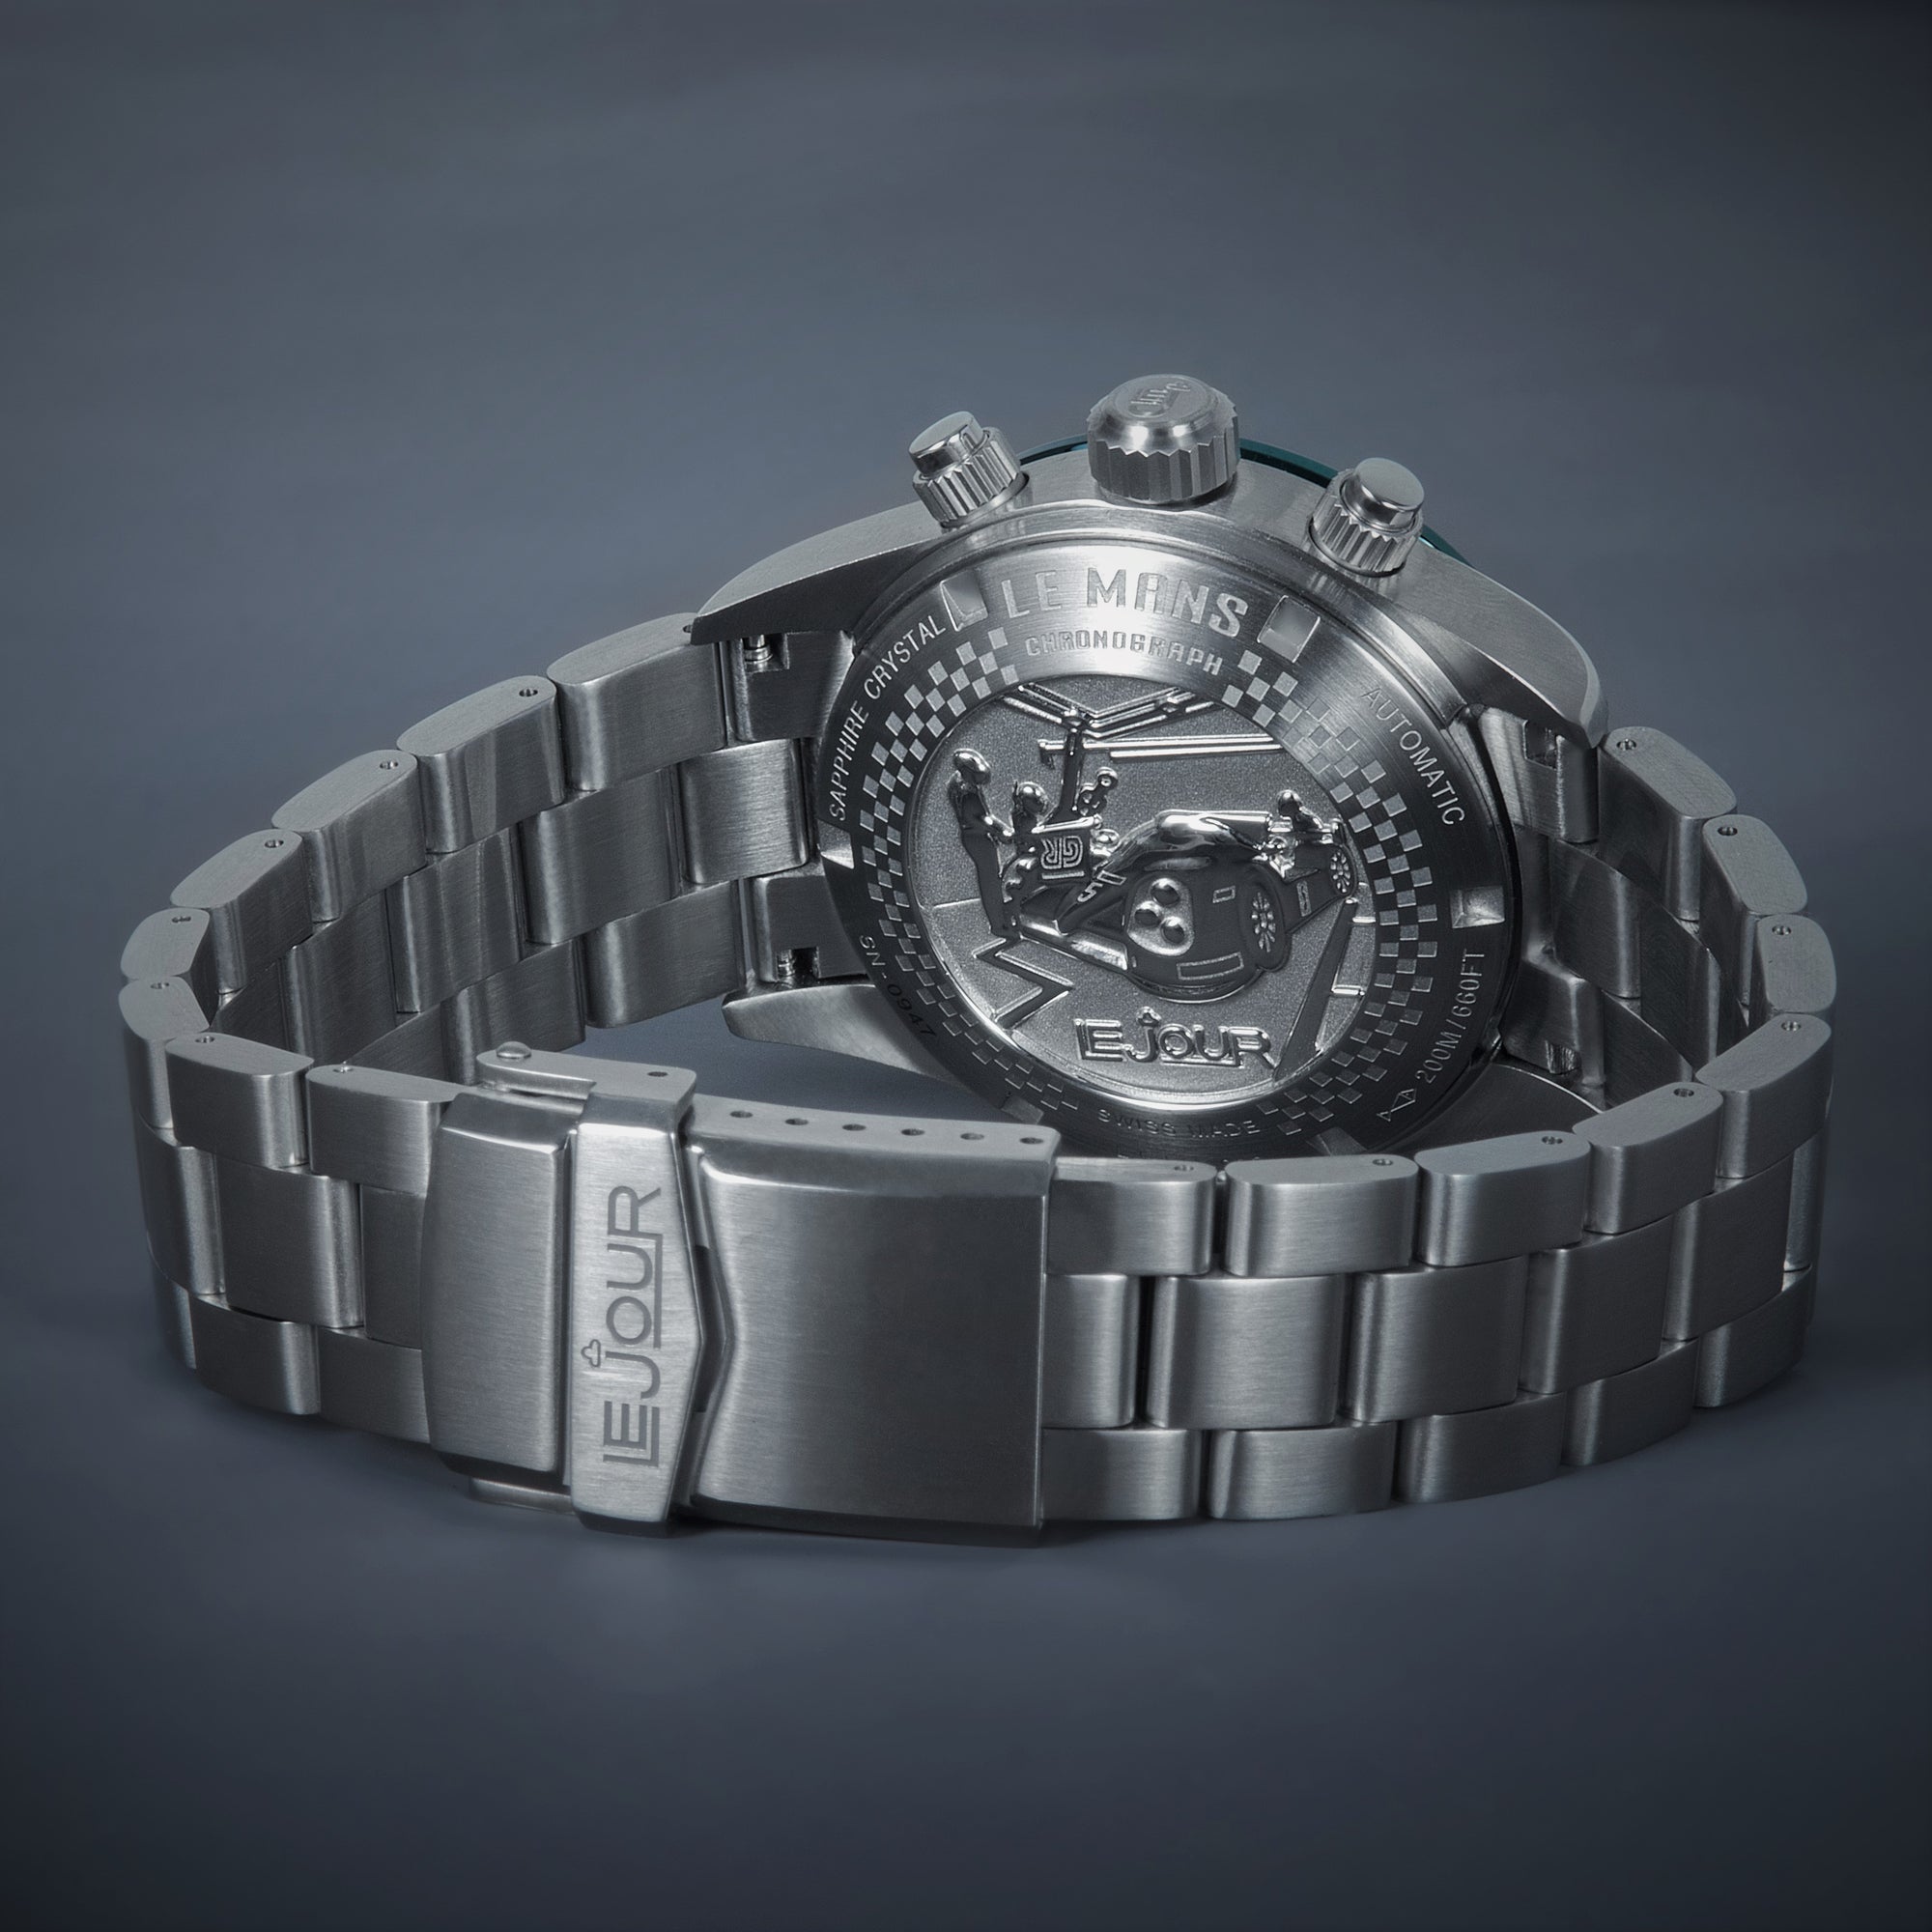 Le Jour - LE MANS Chronograph Watch I Swiss Made I Automatic - Le Jour  Watches